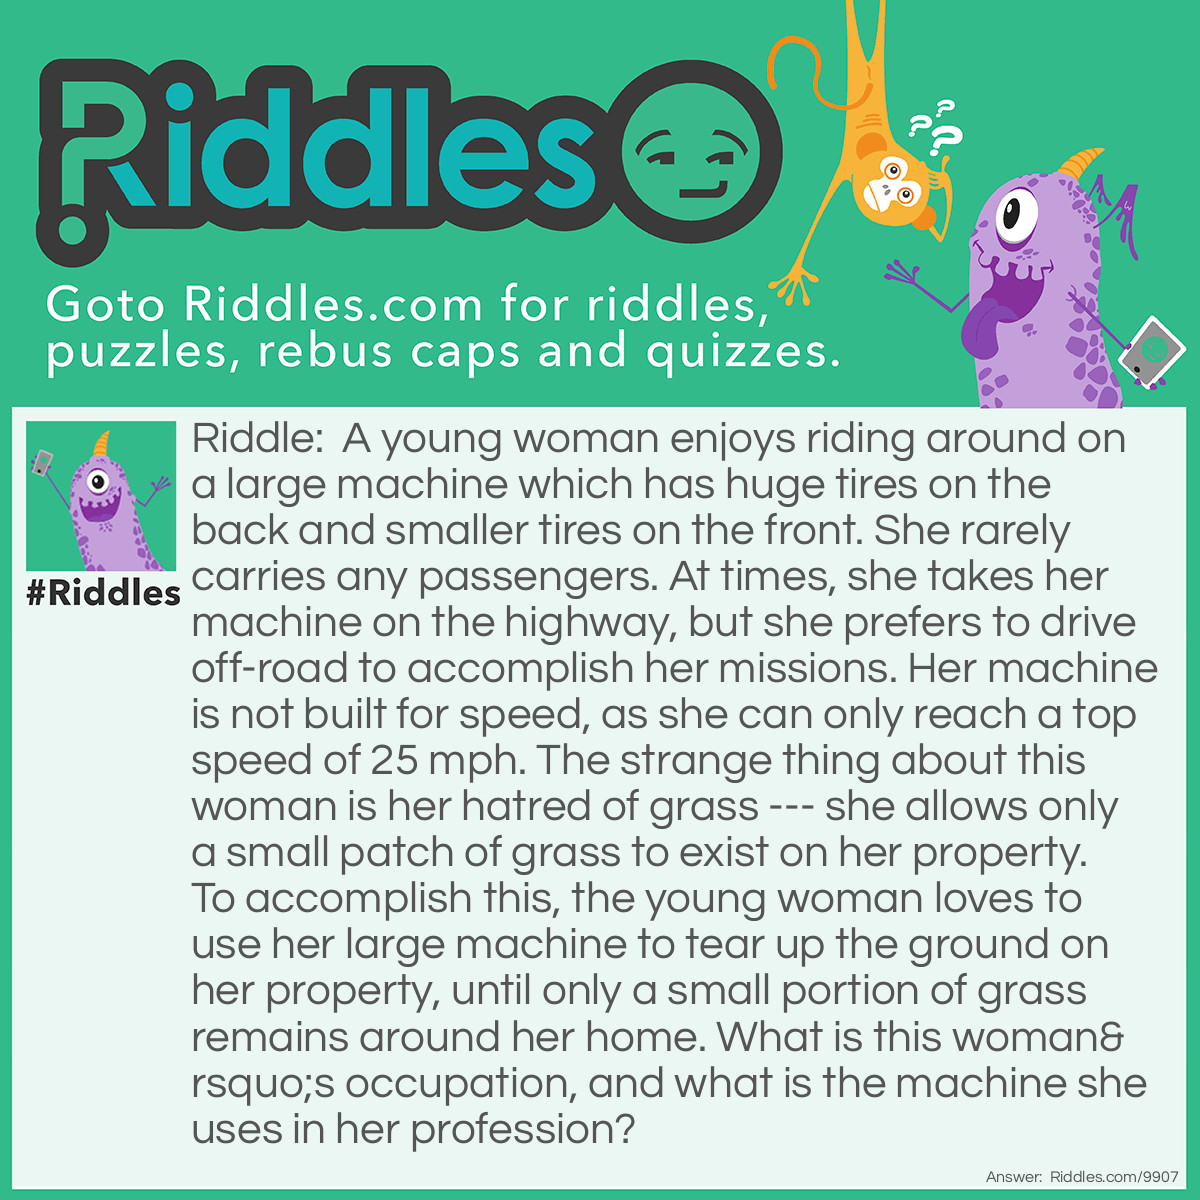 Riddle: A young woman enjoys riding around on a large machine which has huge tires on the back and smaller tires on the front. She rarely carries any passengers. At times, she takes her machine on the highway, but she prefers to drive off-road to accomplish her missions. Her machine is not built for speed, as she can only reach a top speed of 25 mph. The strange thing about this woman is her hatred of grass --- she allows only a small patch of grass to exist on her property. To accomplish this, the young woman loves to use her large machine to tear up the ground on her property, until only a small portion of grass remains around her home. What is this woman's occupation, and what is the machine she uses in her profession? Answer: The young woman is a farmer, and the machine she uses is a tractor.